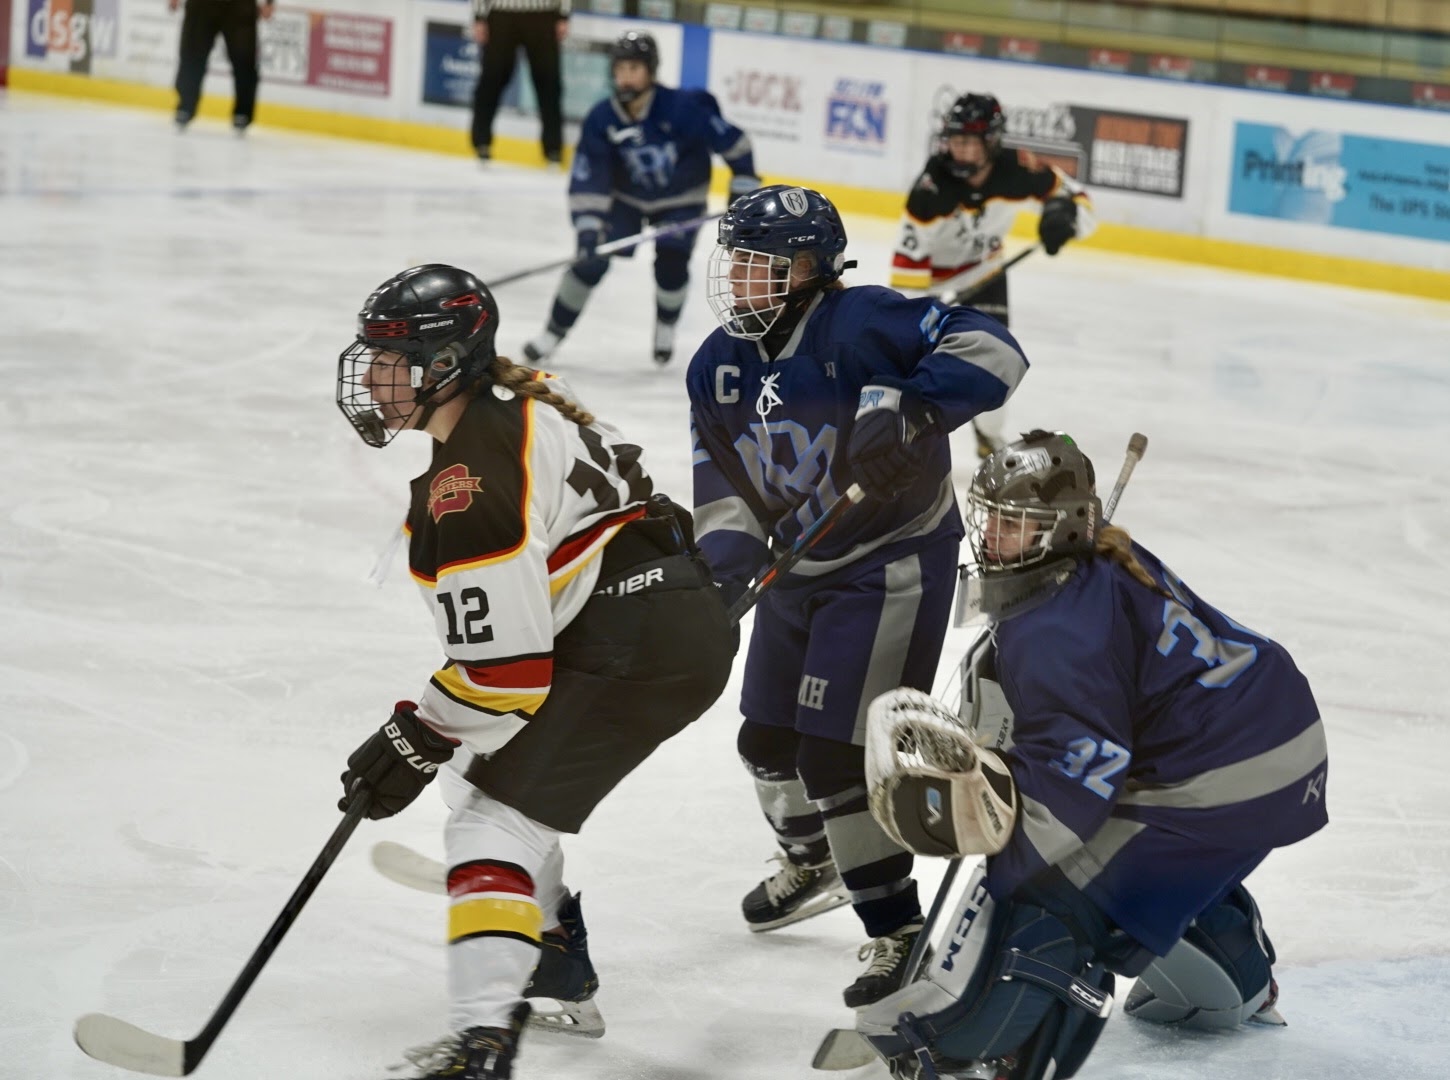 Roseville/Mahtomedi goaltender Lily Peterson and defender Lexi Jensen guard the net in front of Duluth's Jenna Horvat.